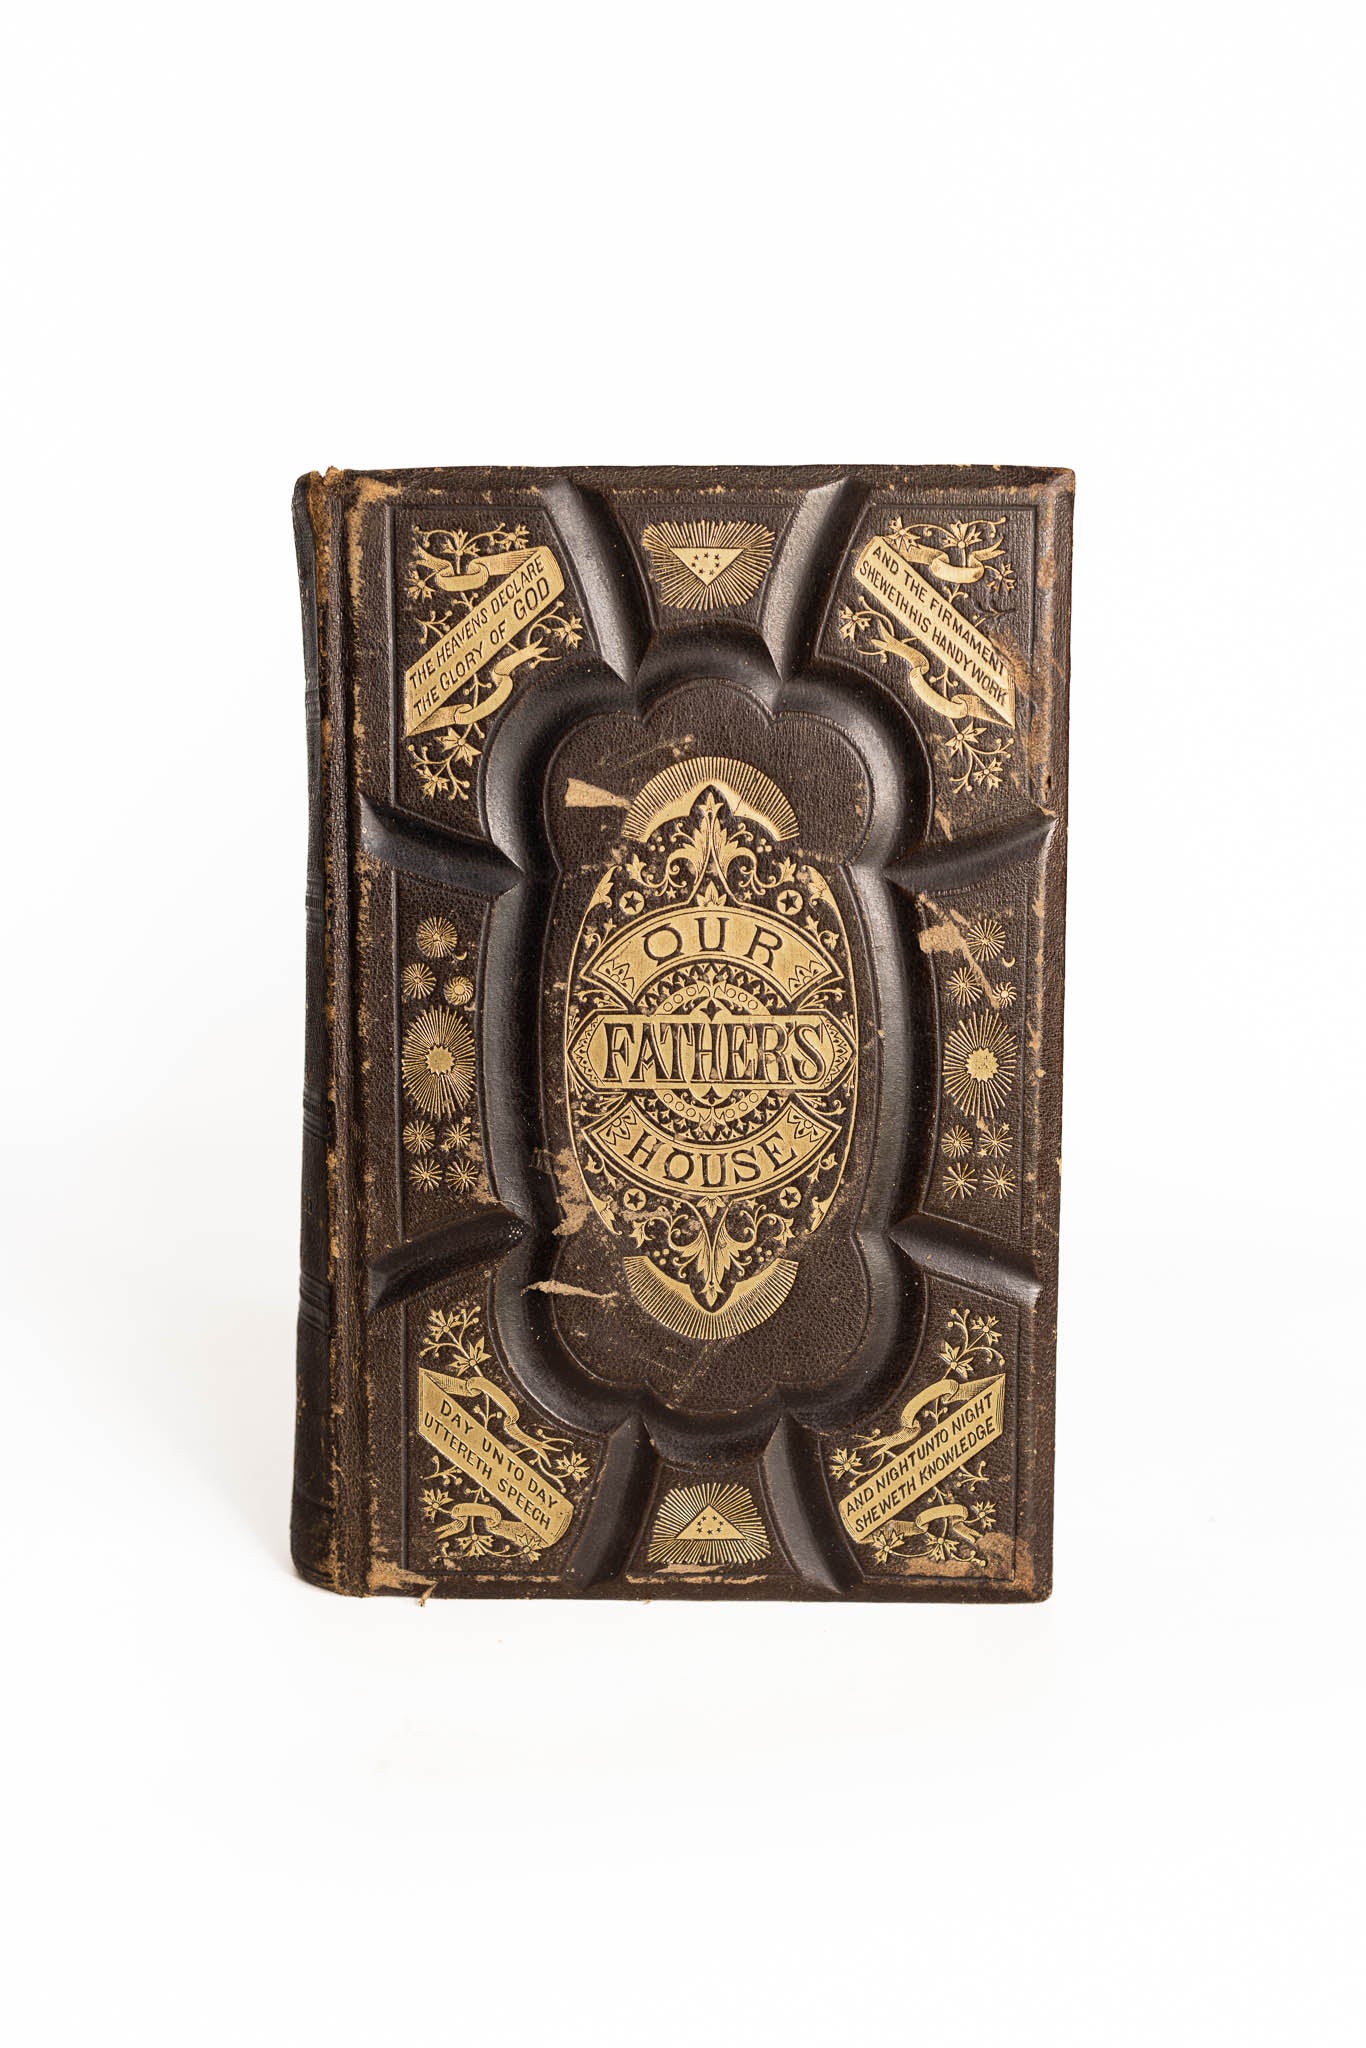 Our Fathers House Leatherbound 1870